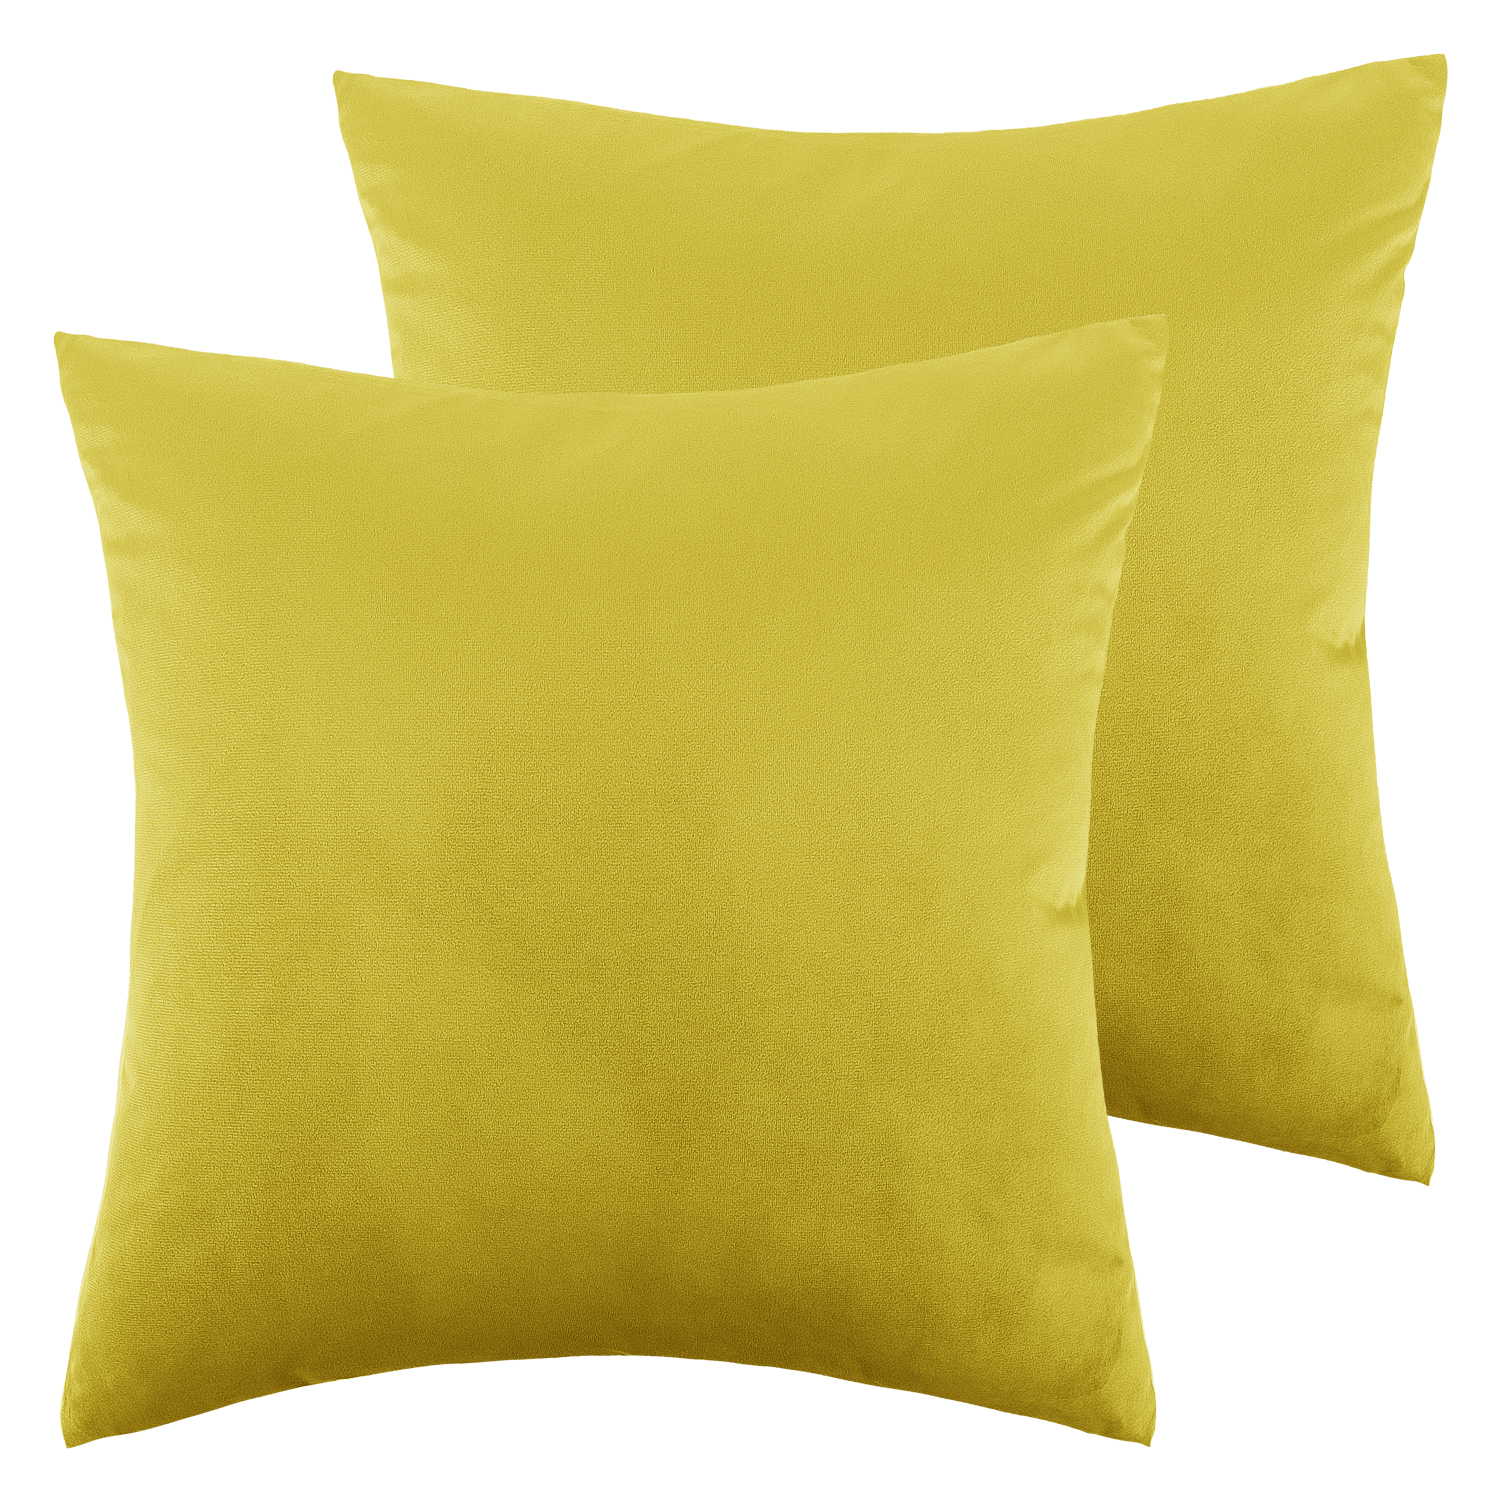 Lewondr Waterproof Outdoor Throw Pillow Cover 45x45cm Yellow 2 Pack Relax Printing Throw Pillow Case UV Protection Garden Cushion Cover for Patio Sofa Couch Balcony Christmas Decor 18x18 